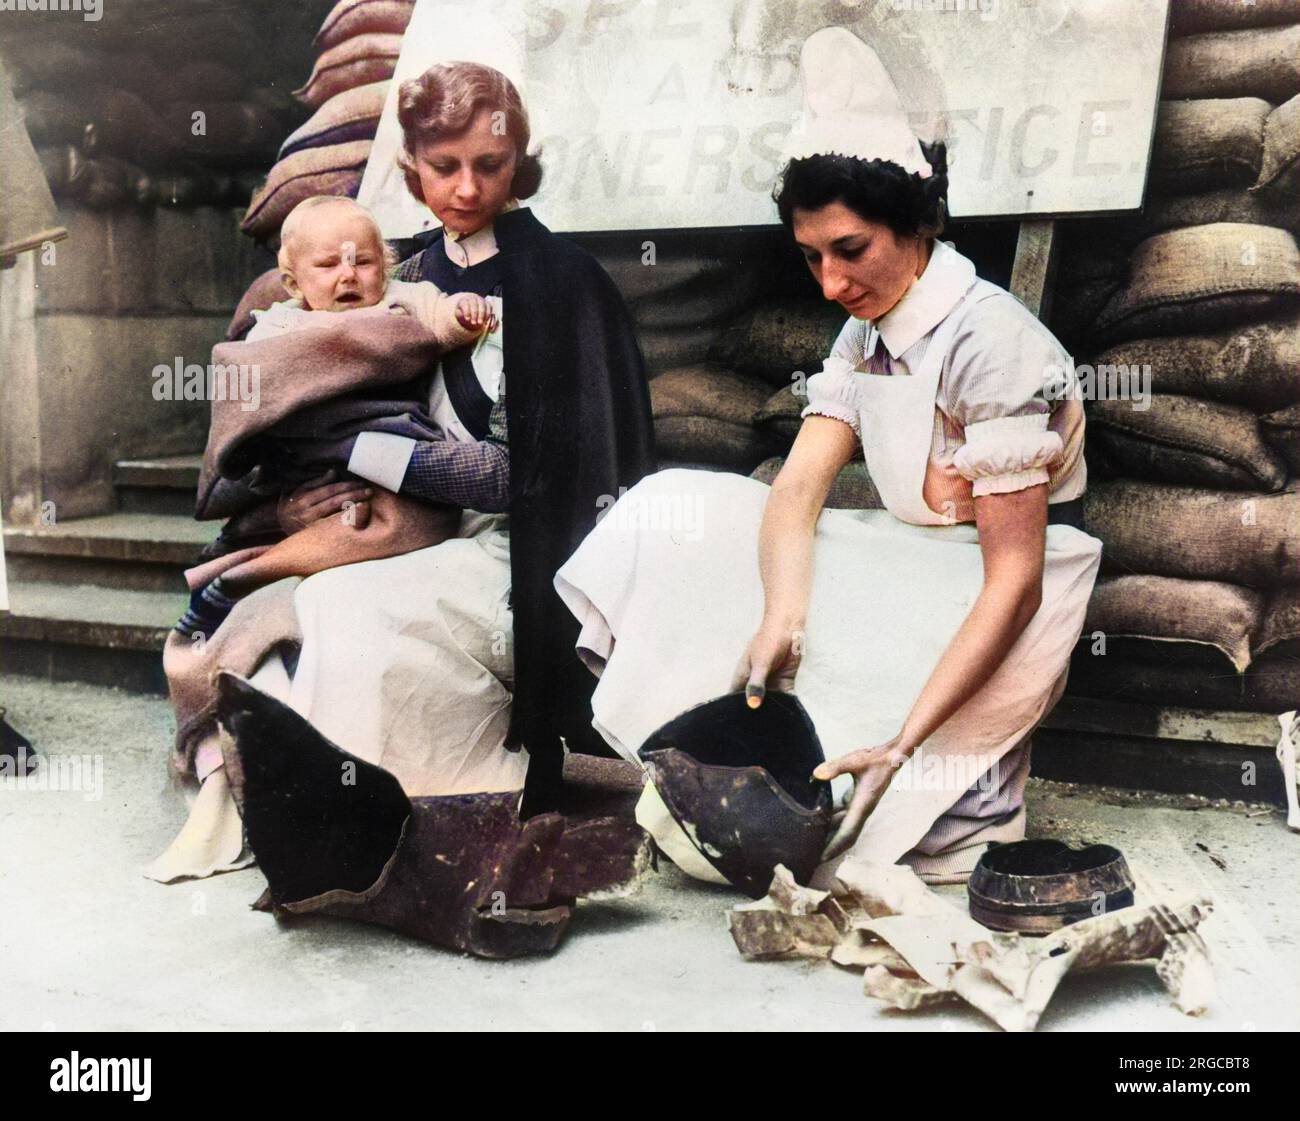 Nurses from The Great Ormond Street Children's Hospital examine fragments from the bomb which struck the building but (thankfully) caused no loss of life - September, 1940. The sign reads: Dispensary and Almoner's Office Stock Photo